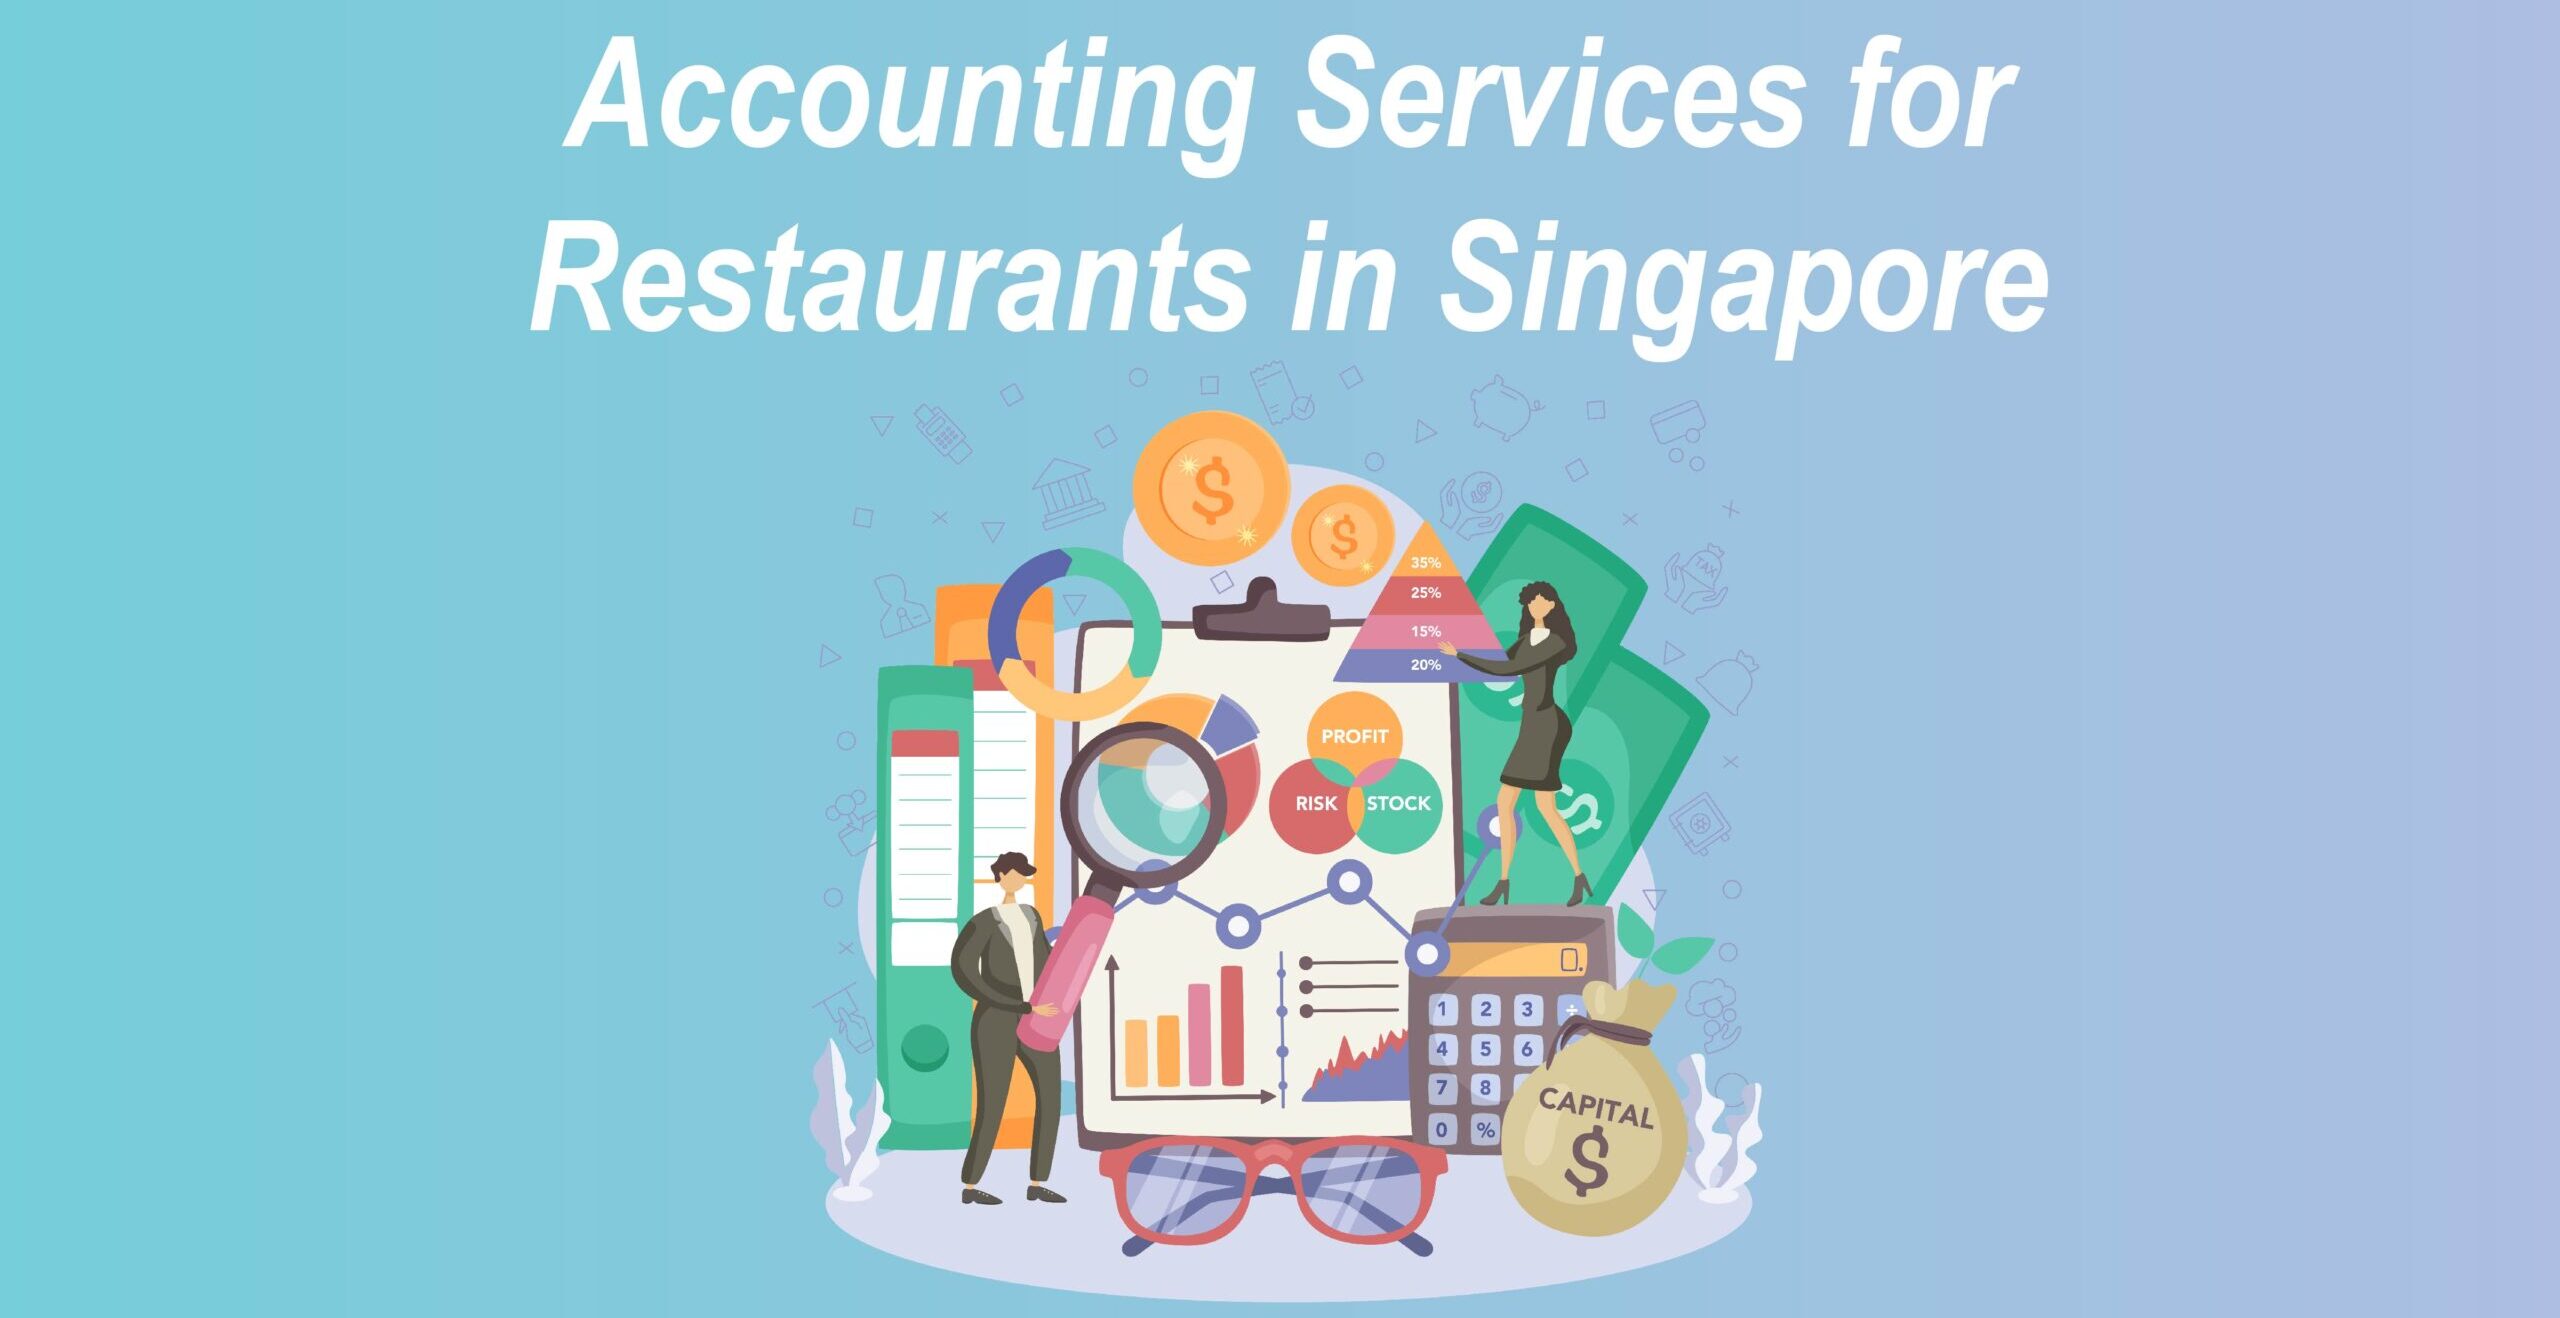 Accounting Firms Offering Accounting Services for Restaurants